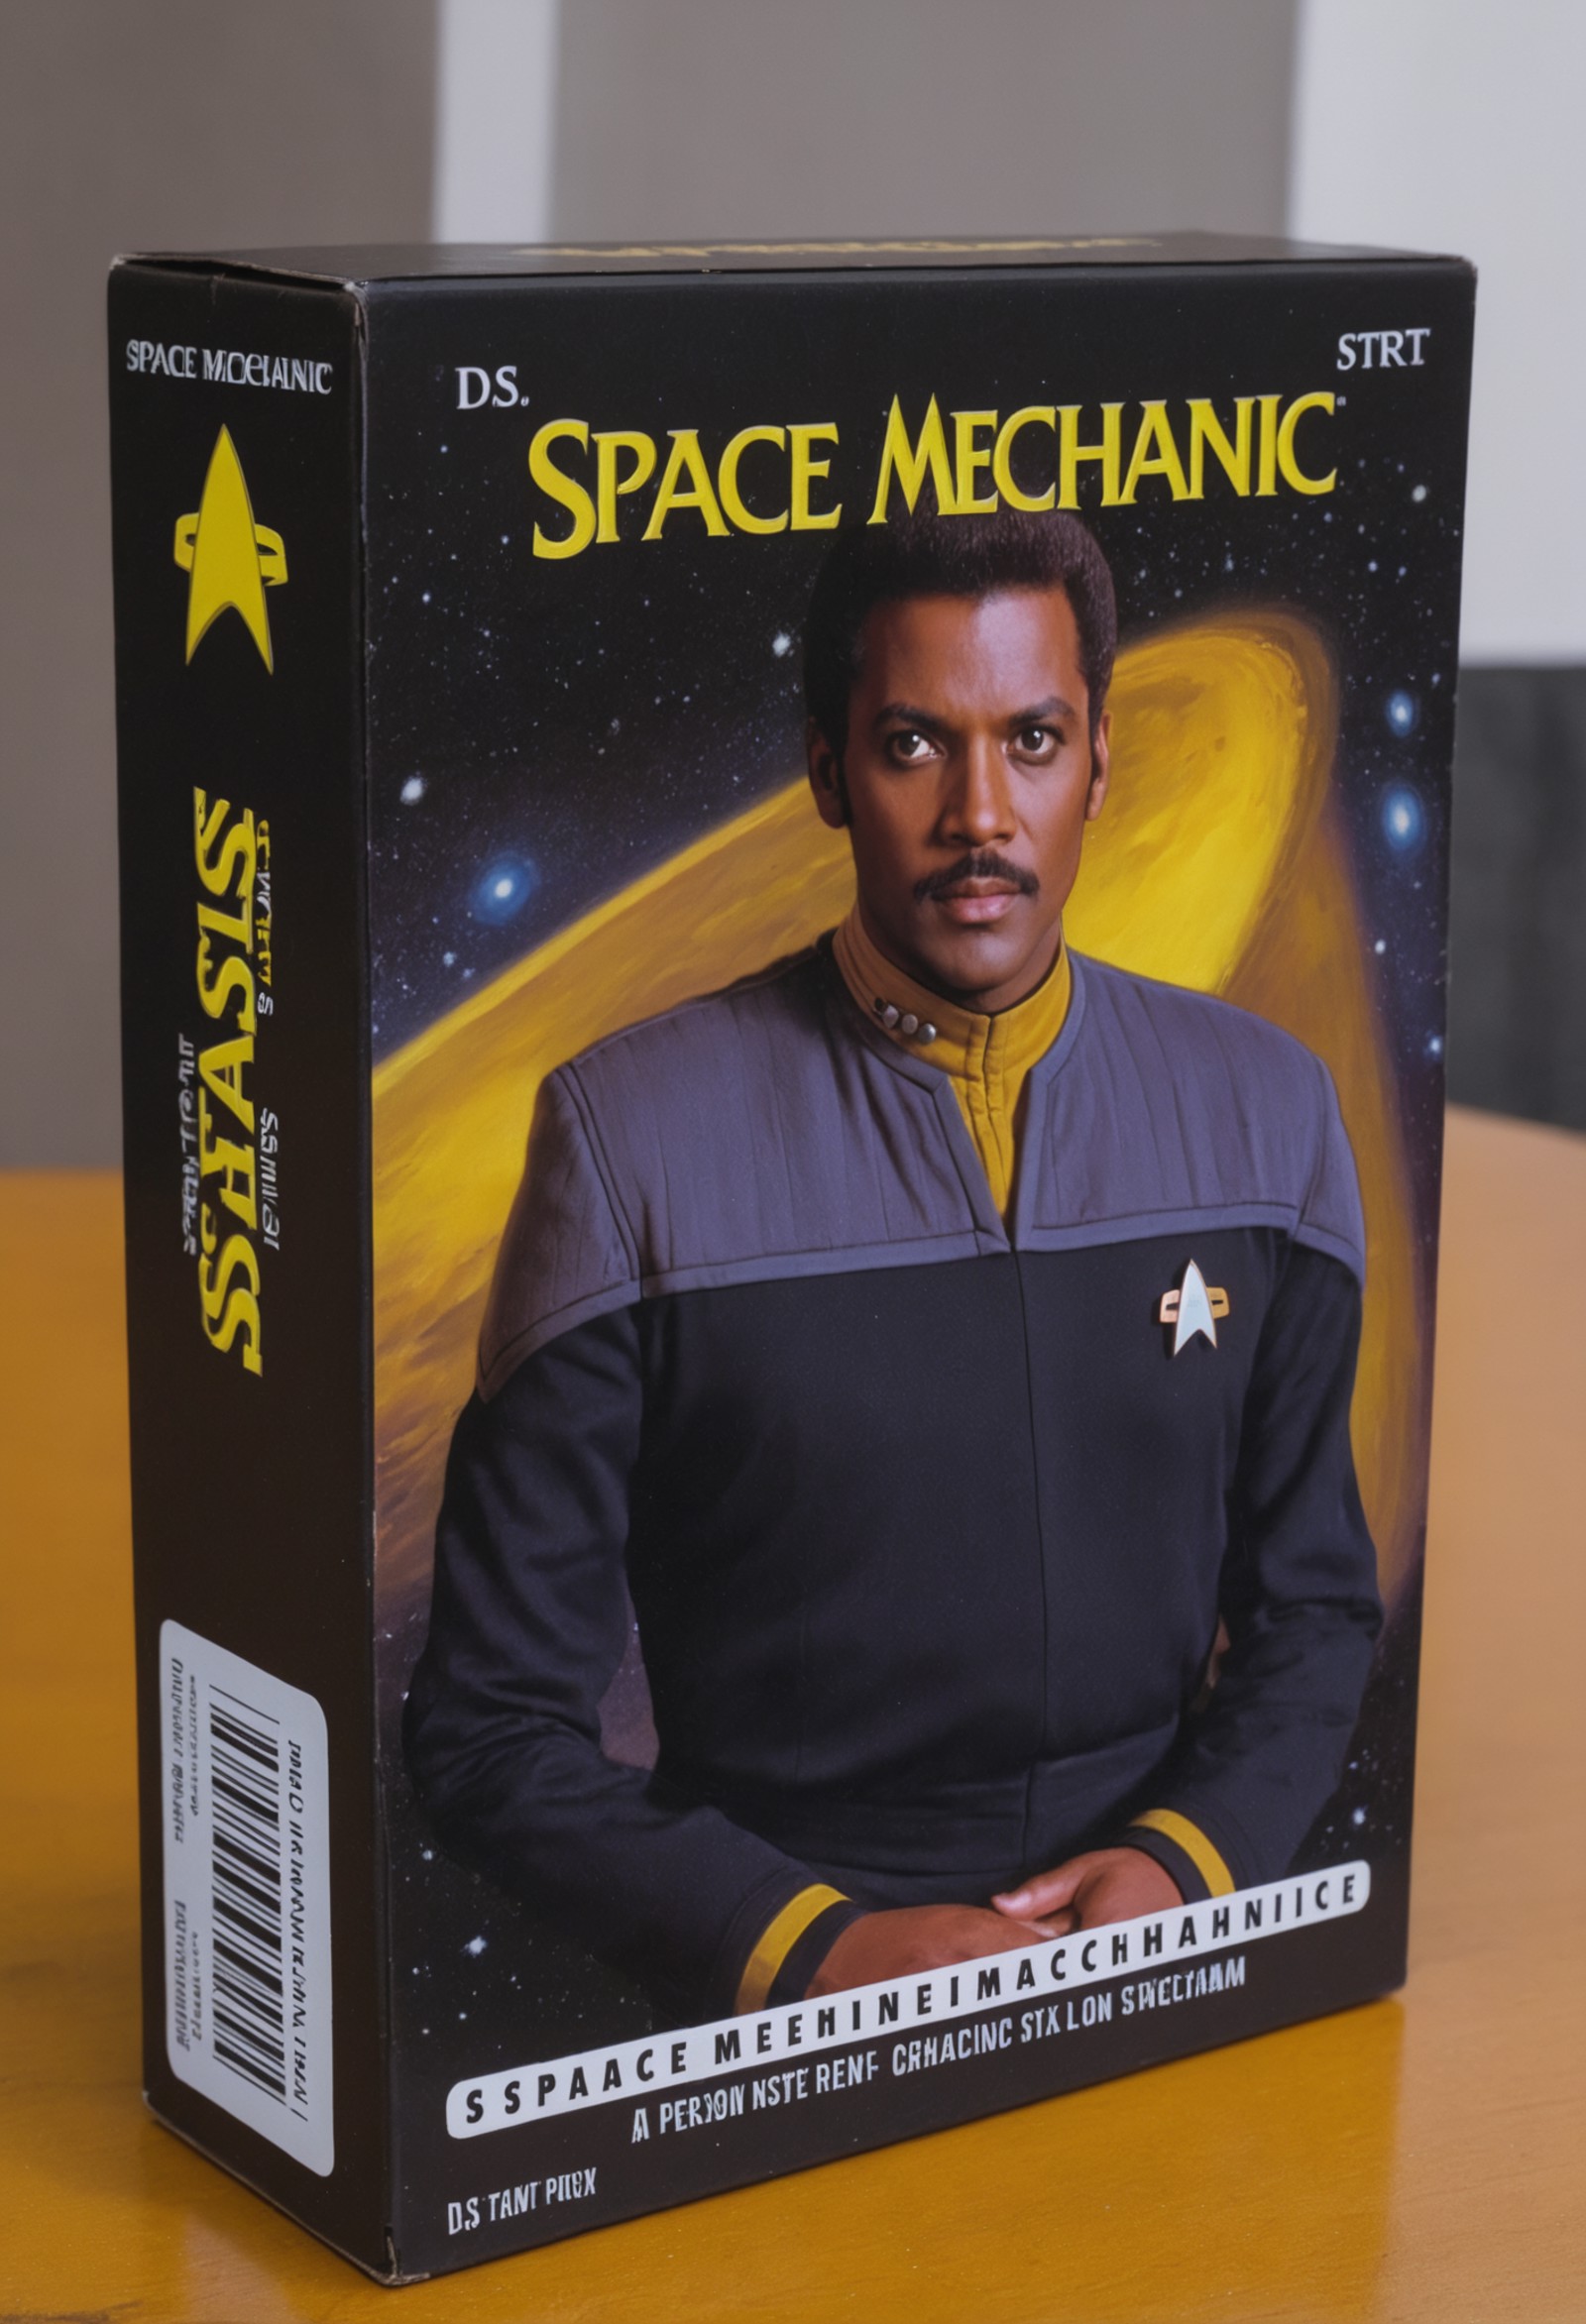 boardgame box on a table,box of game named "SPACE MECHANIC" with a cover art of person wearing black and grey ds9st unifor...